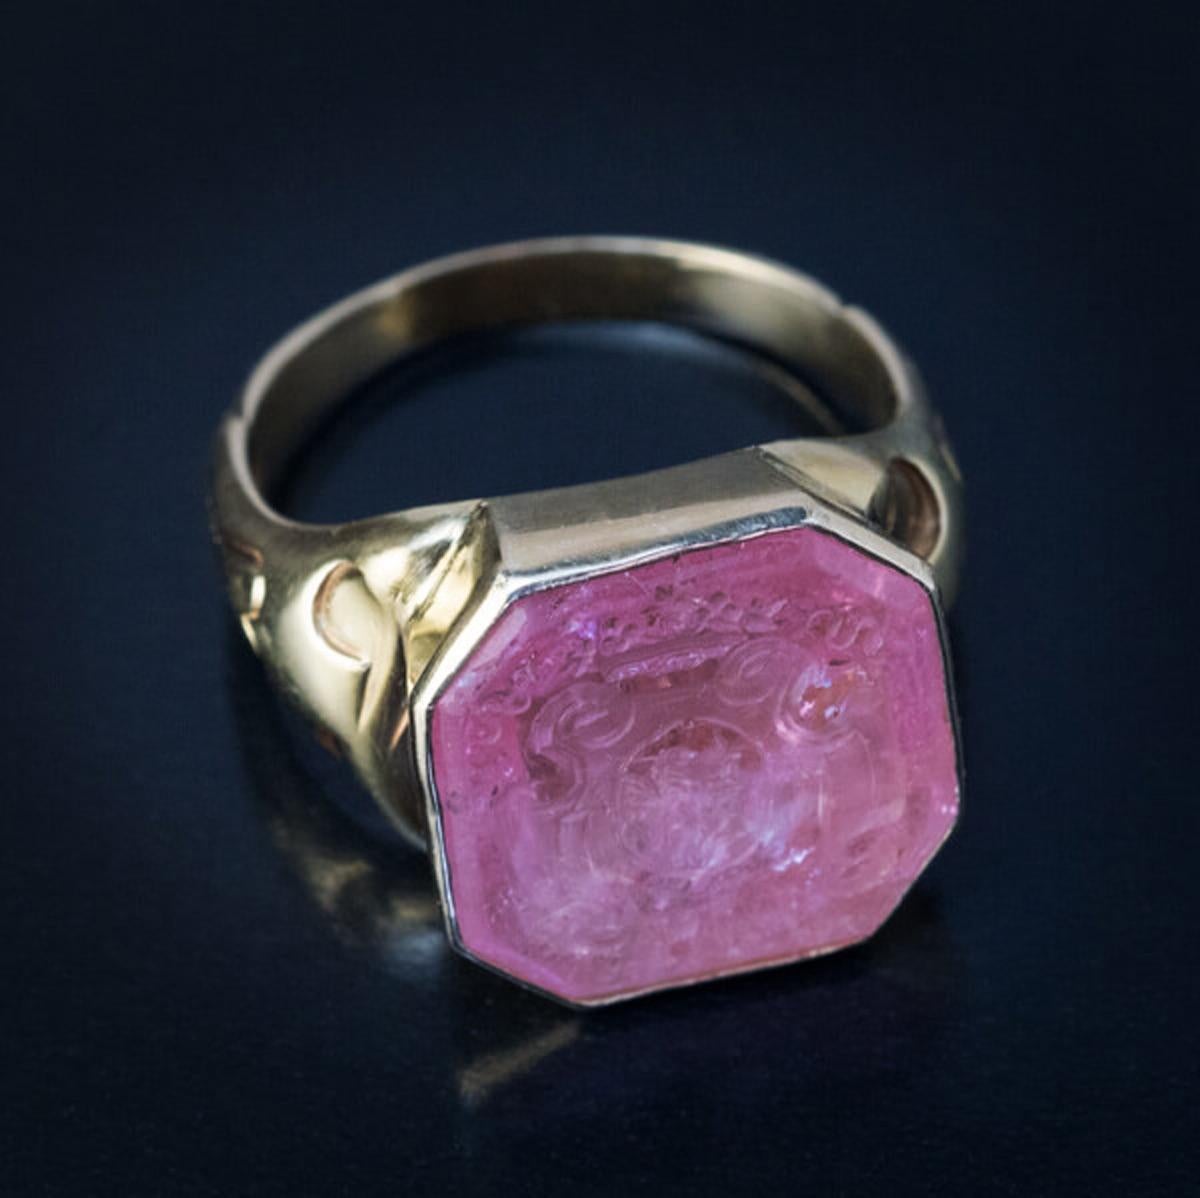 This rare antique Russian gold and carved pink tourmaline armorial signet ring is marked with St.Petersburg assay mark dated ‘1869’ but the tourmaline intaglio is much older. It dates to circa 1730. The intaglio is engraved with a griffin holding a